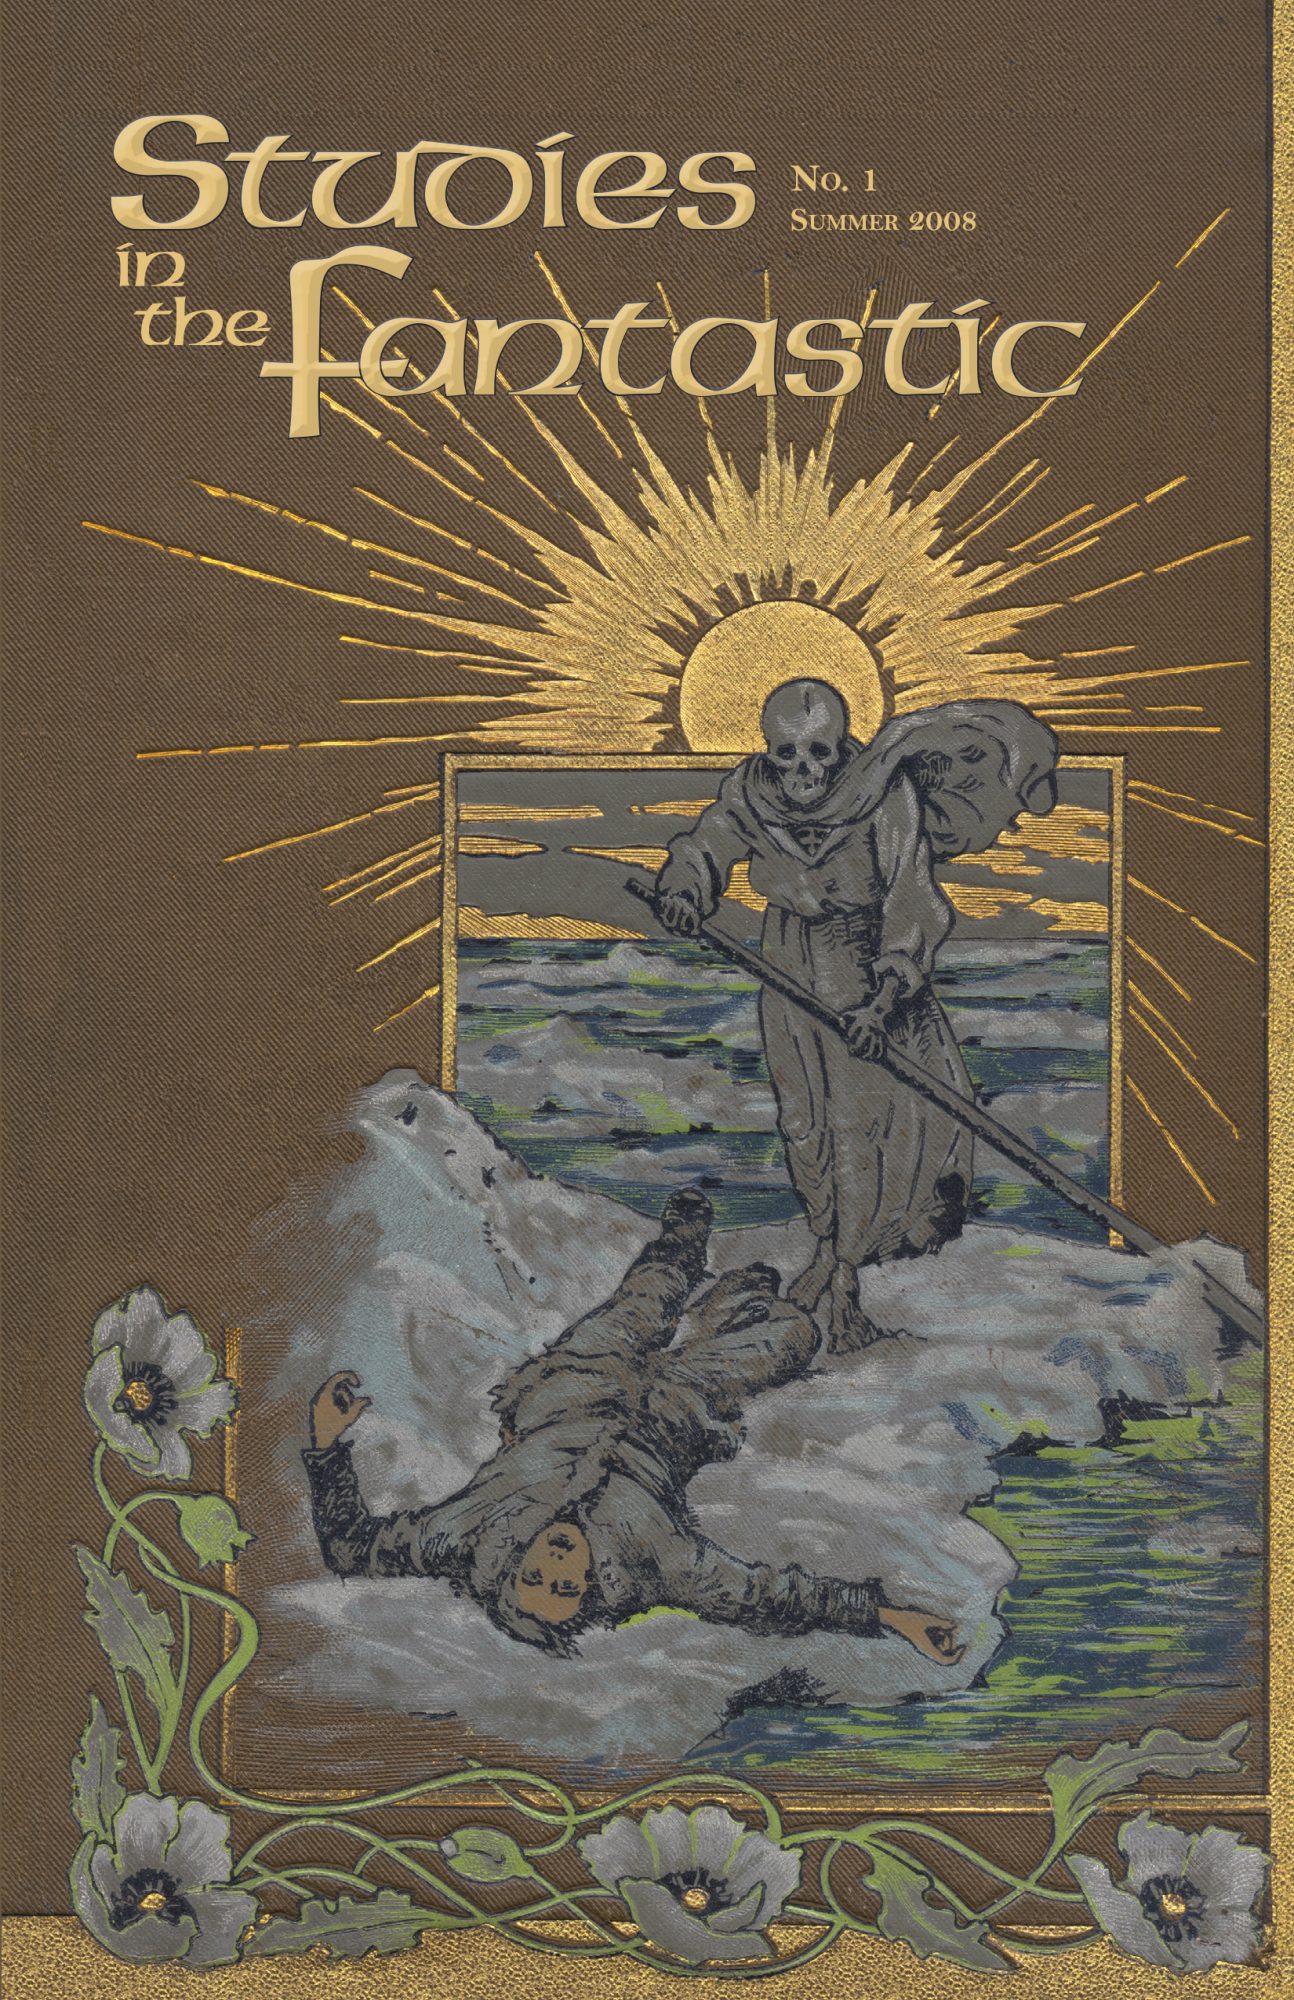 Image of the front cover of Studies of the Fantastic, No. 1. 